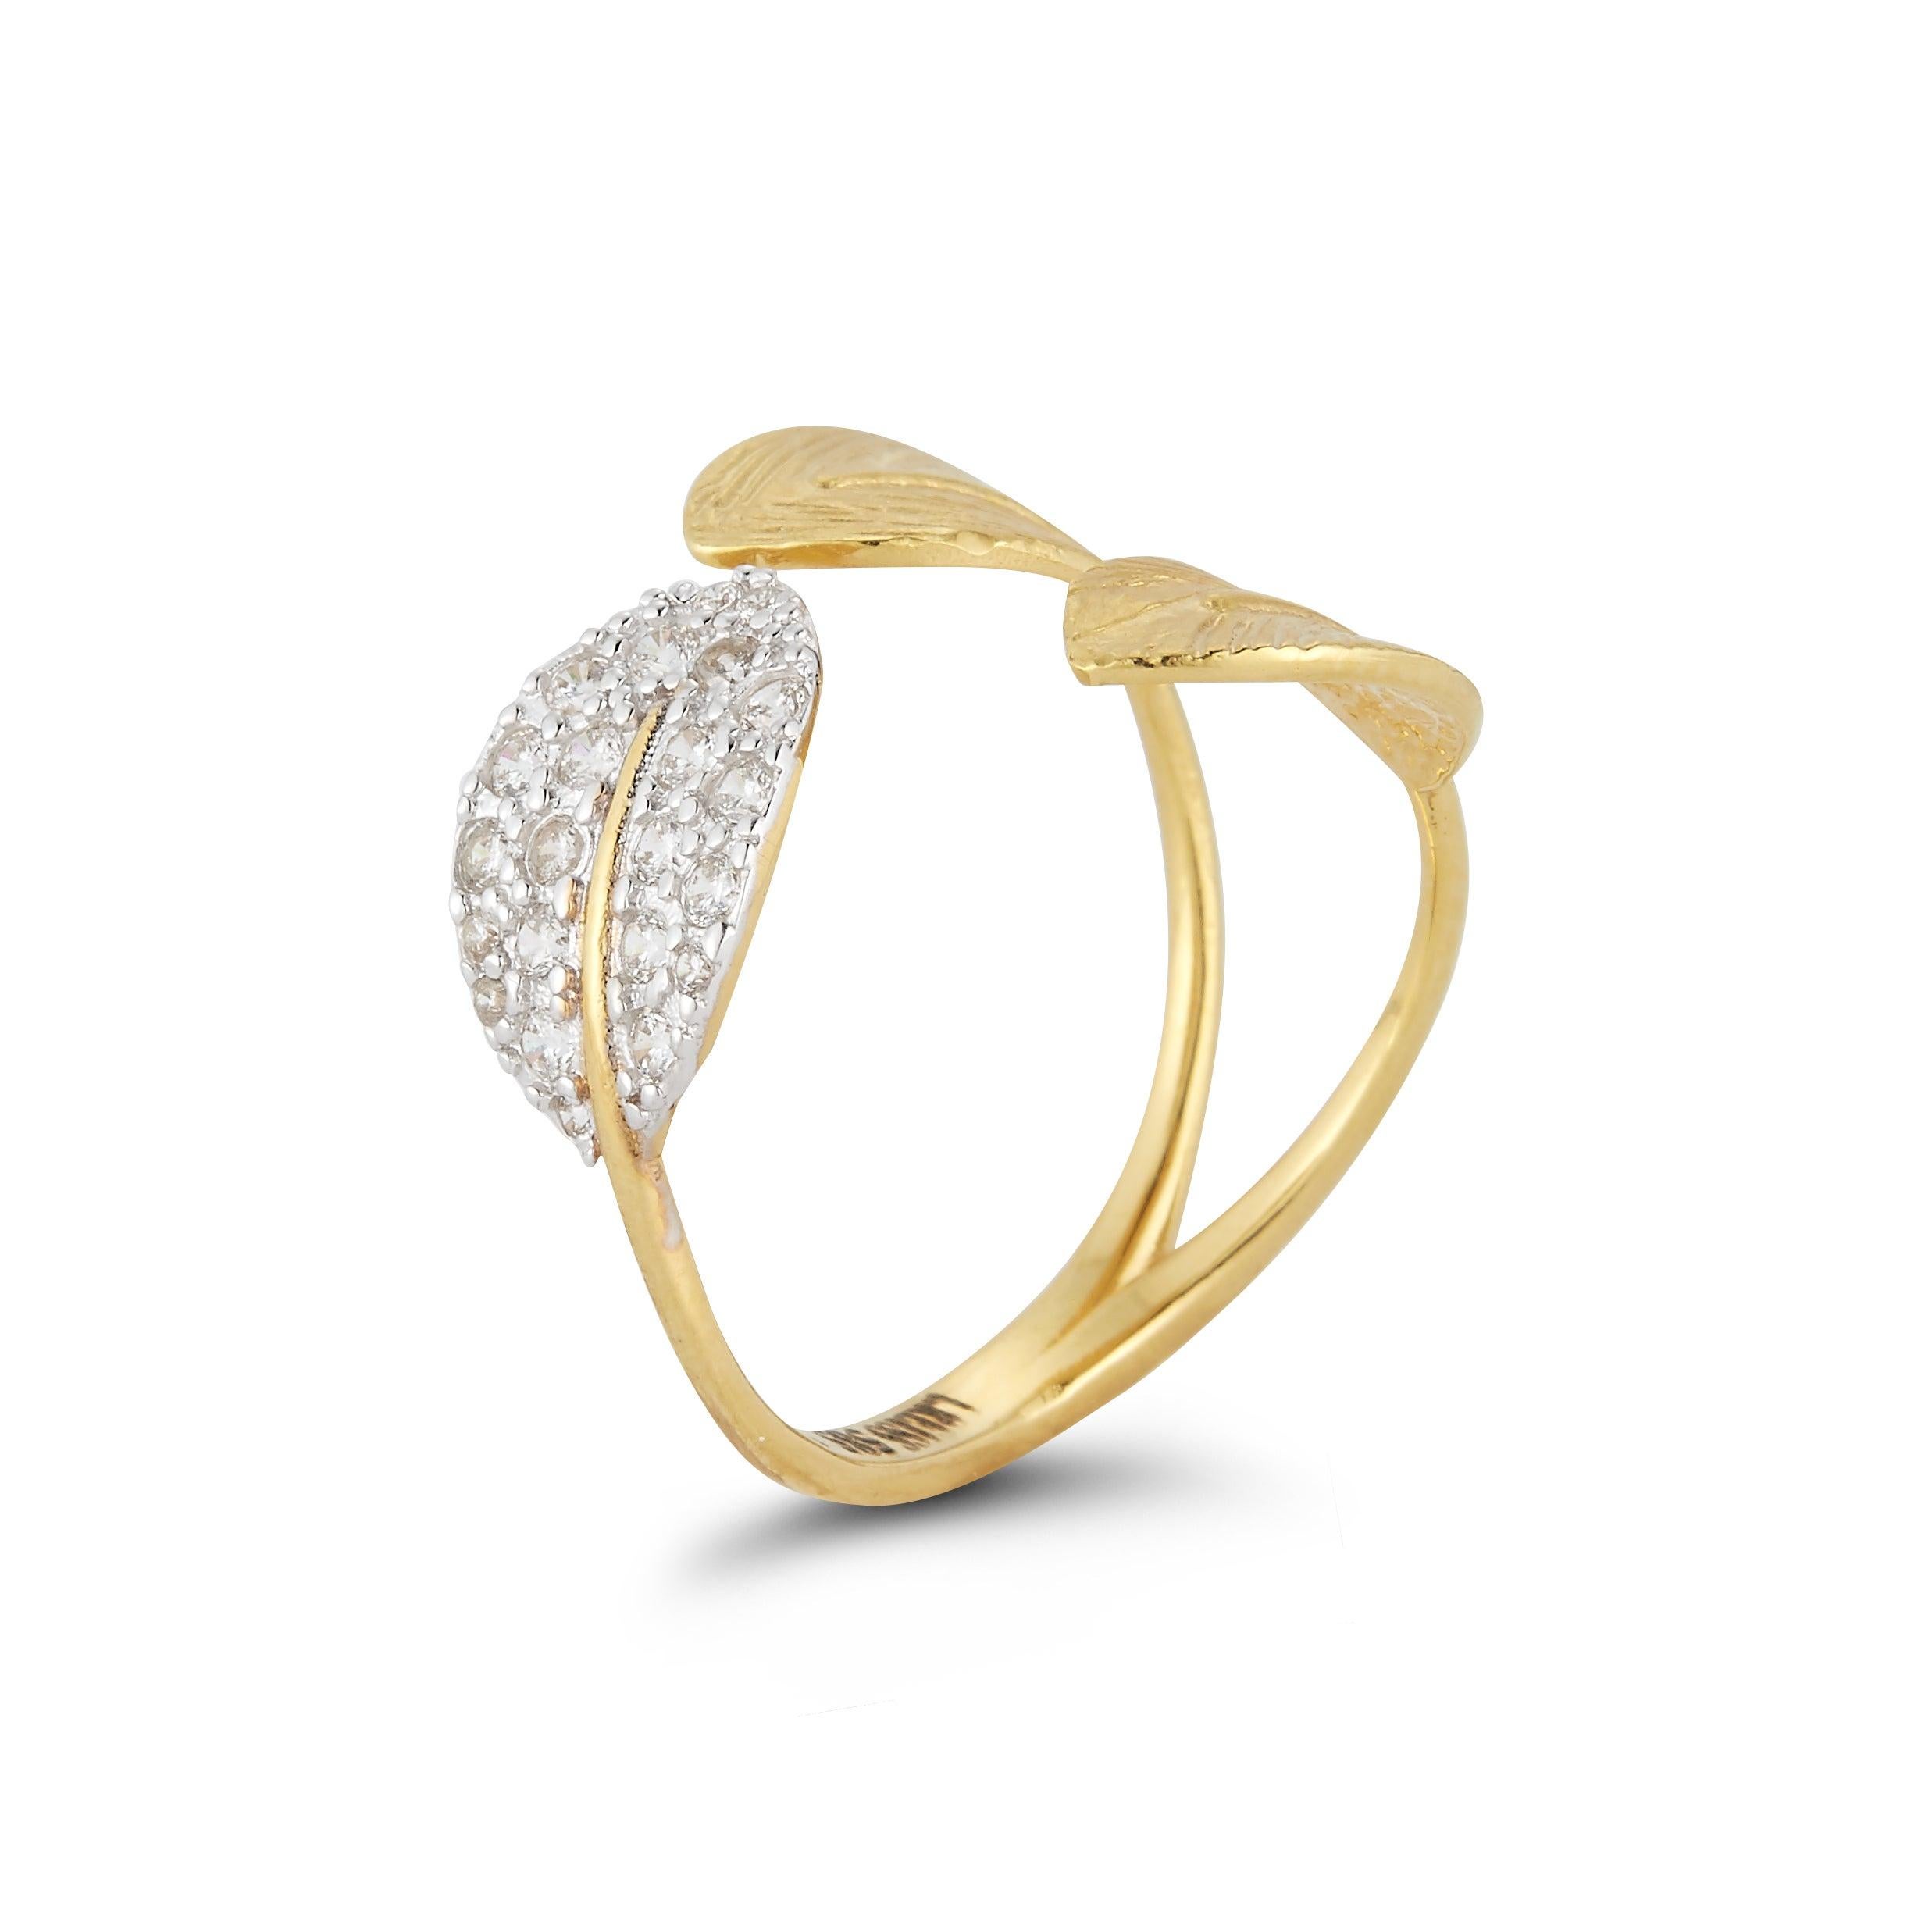 For Sale:  Handcrafted 14 Karat Yellow Gold 3-Leaf Ring 3